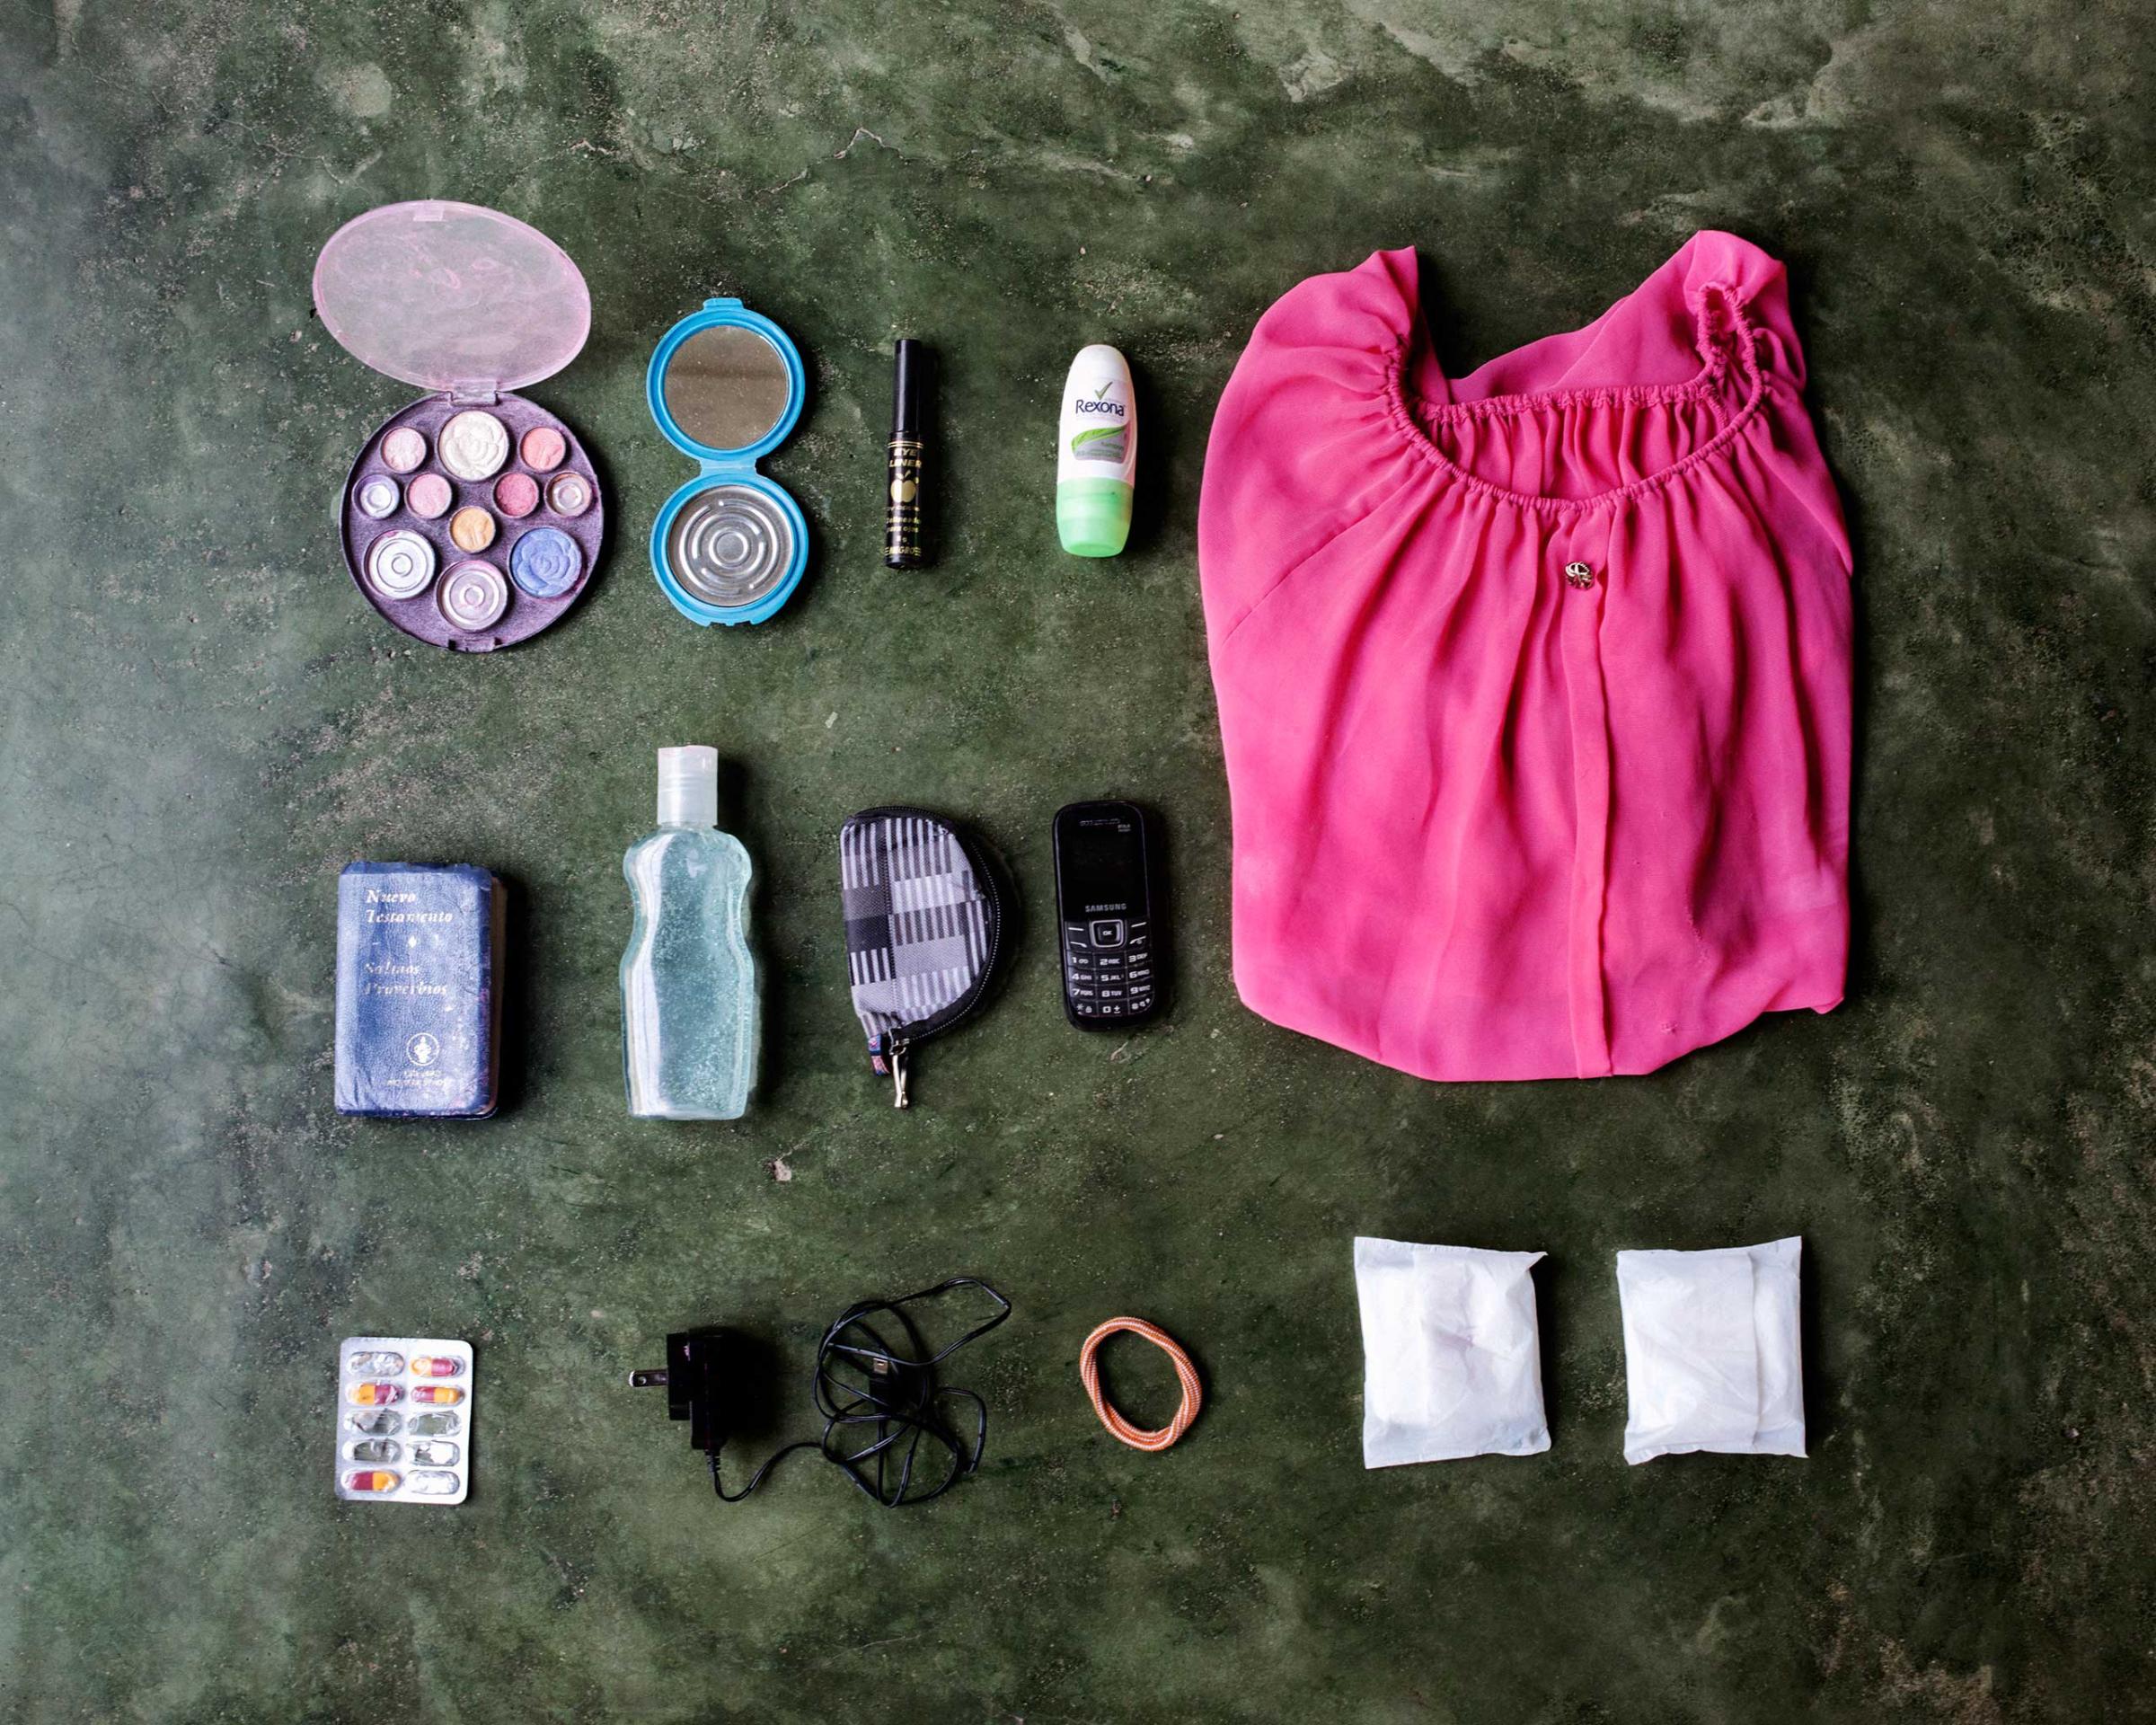 Delmis Helgar, 32, from Honduras. She is in a hurry to reach Houston where her little daughter is living with some relatives, after her ex-husband was recently deported. In her bag has a make-up set, hand mirror, lip gloss, deodorant, shirt, small bible, face gel, wallet, mobile phone, pills, battery charger, hair band and two tampons.